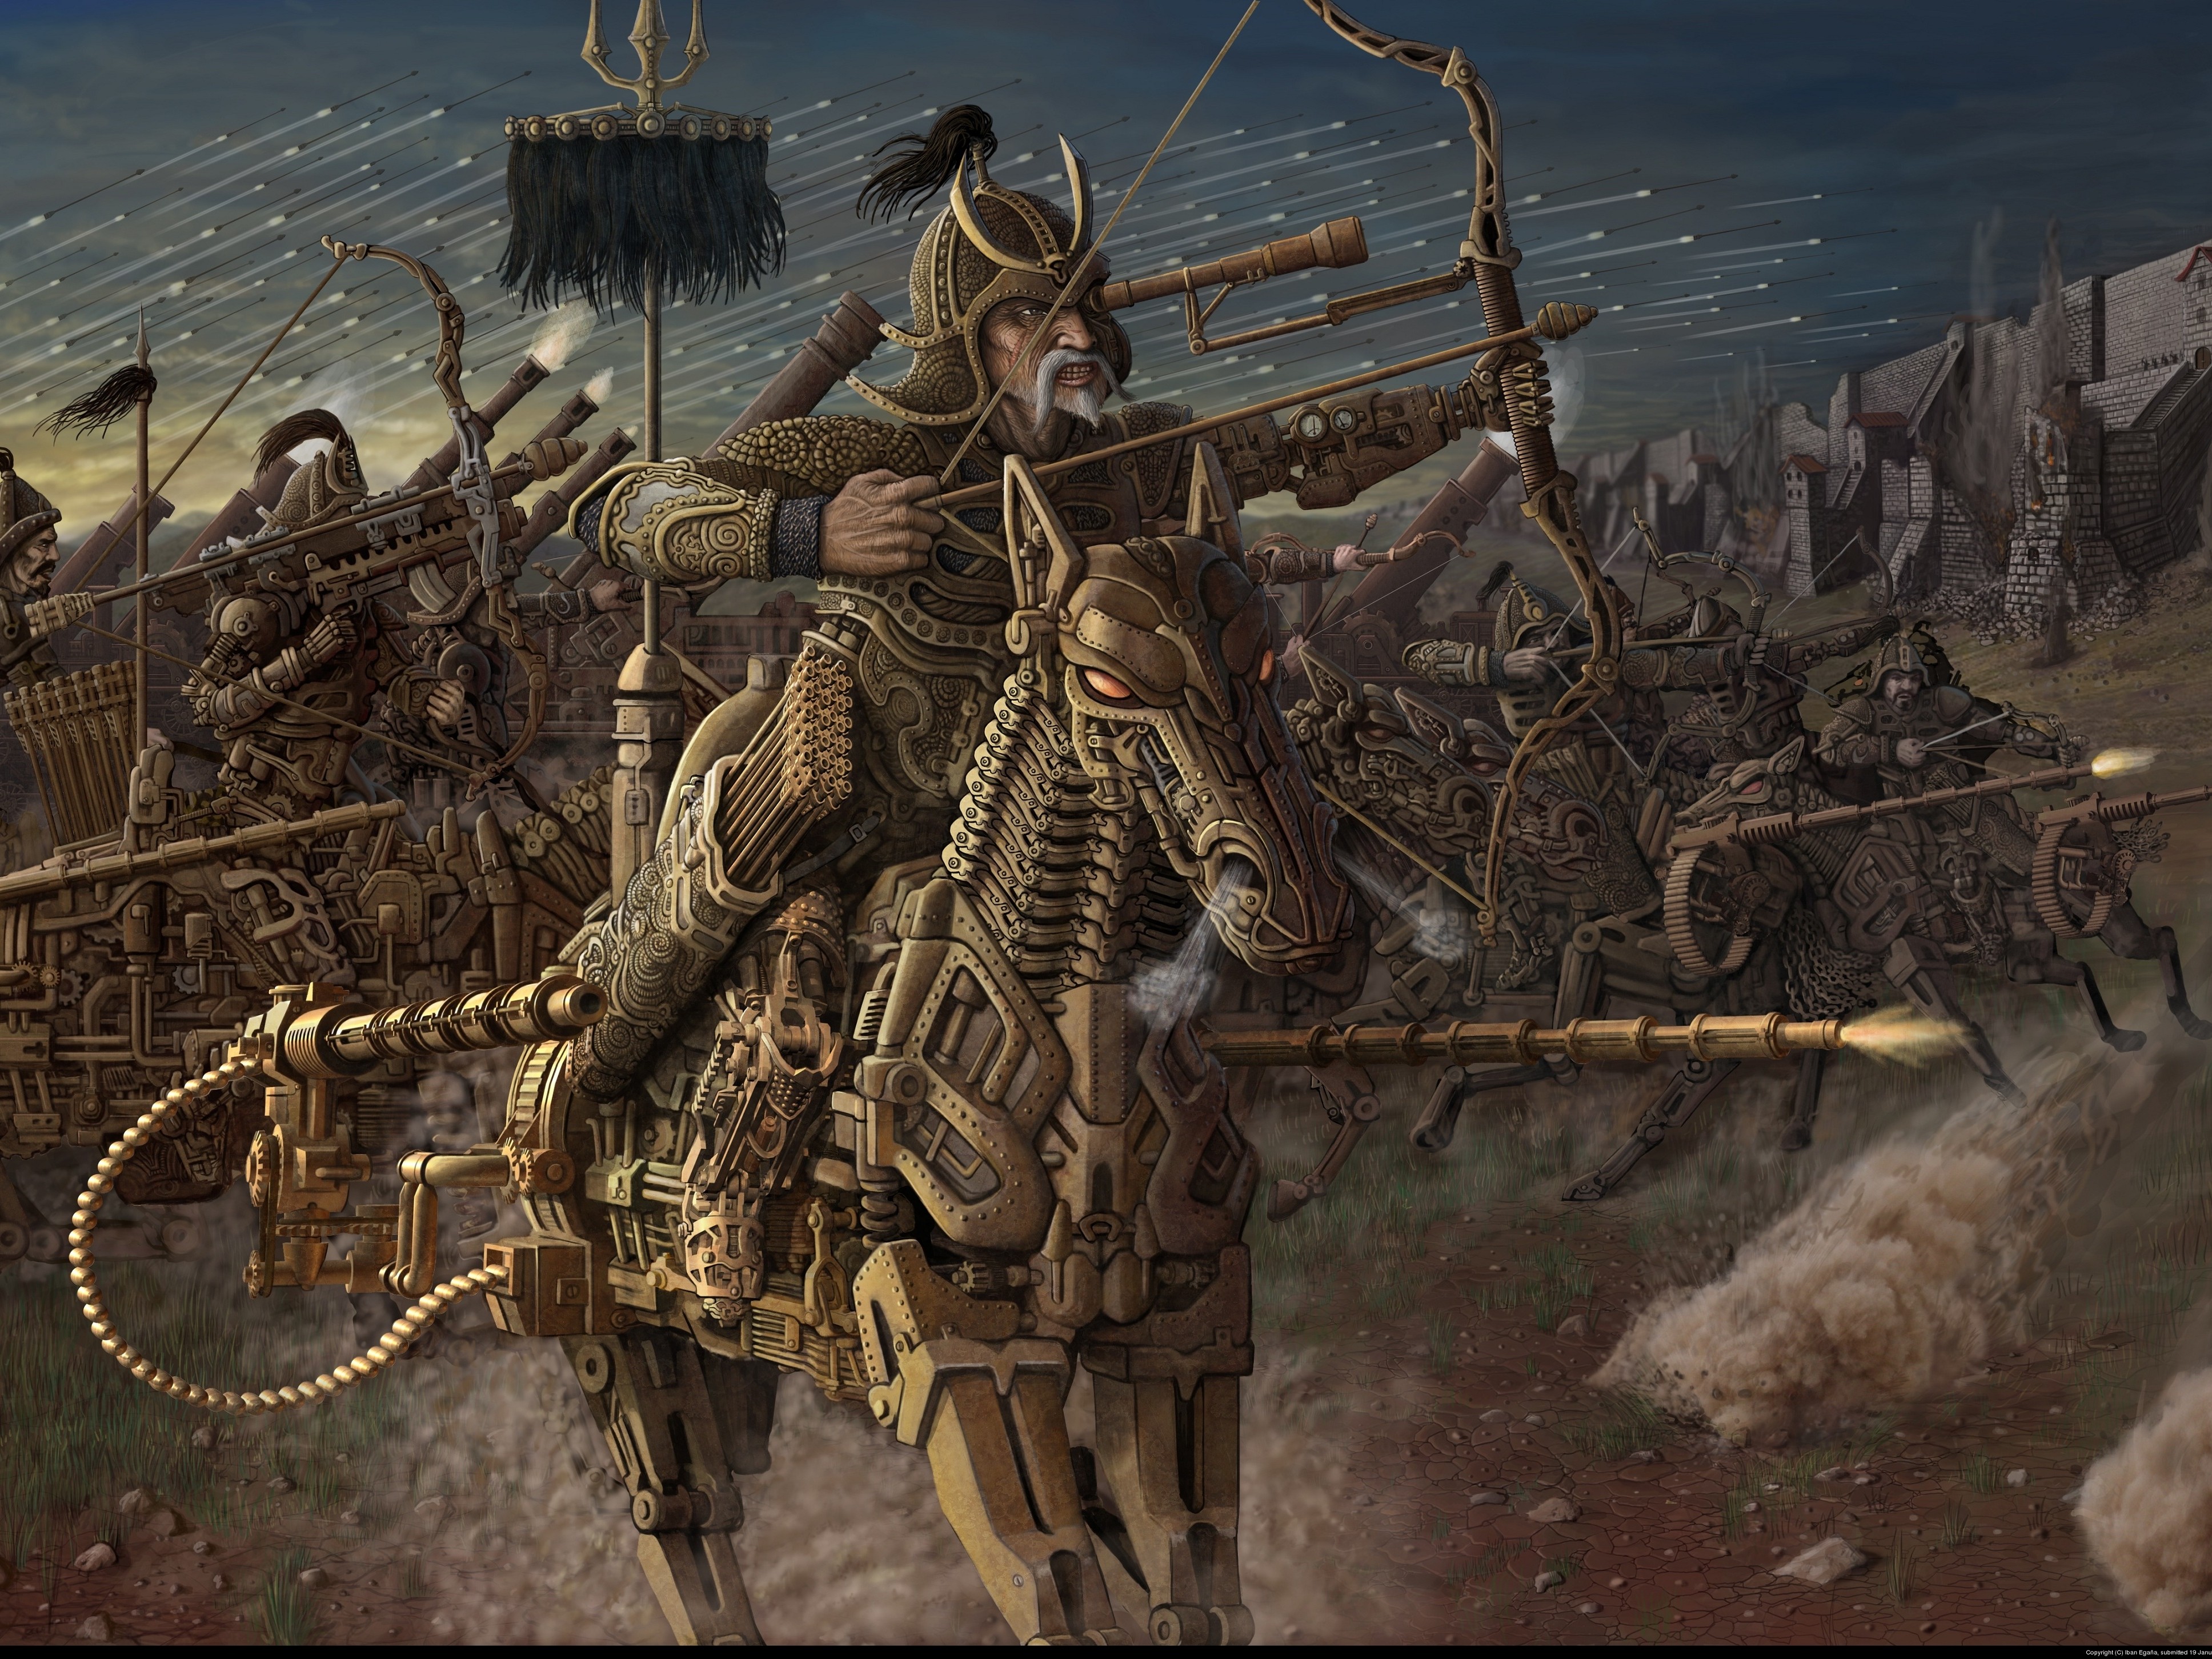 Ancient Old Warrior Horse Fantasy Art Weapon Machine Arrows War Building Soldier Bow Mongols Smoke W 3872x2904